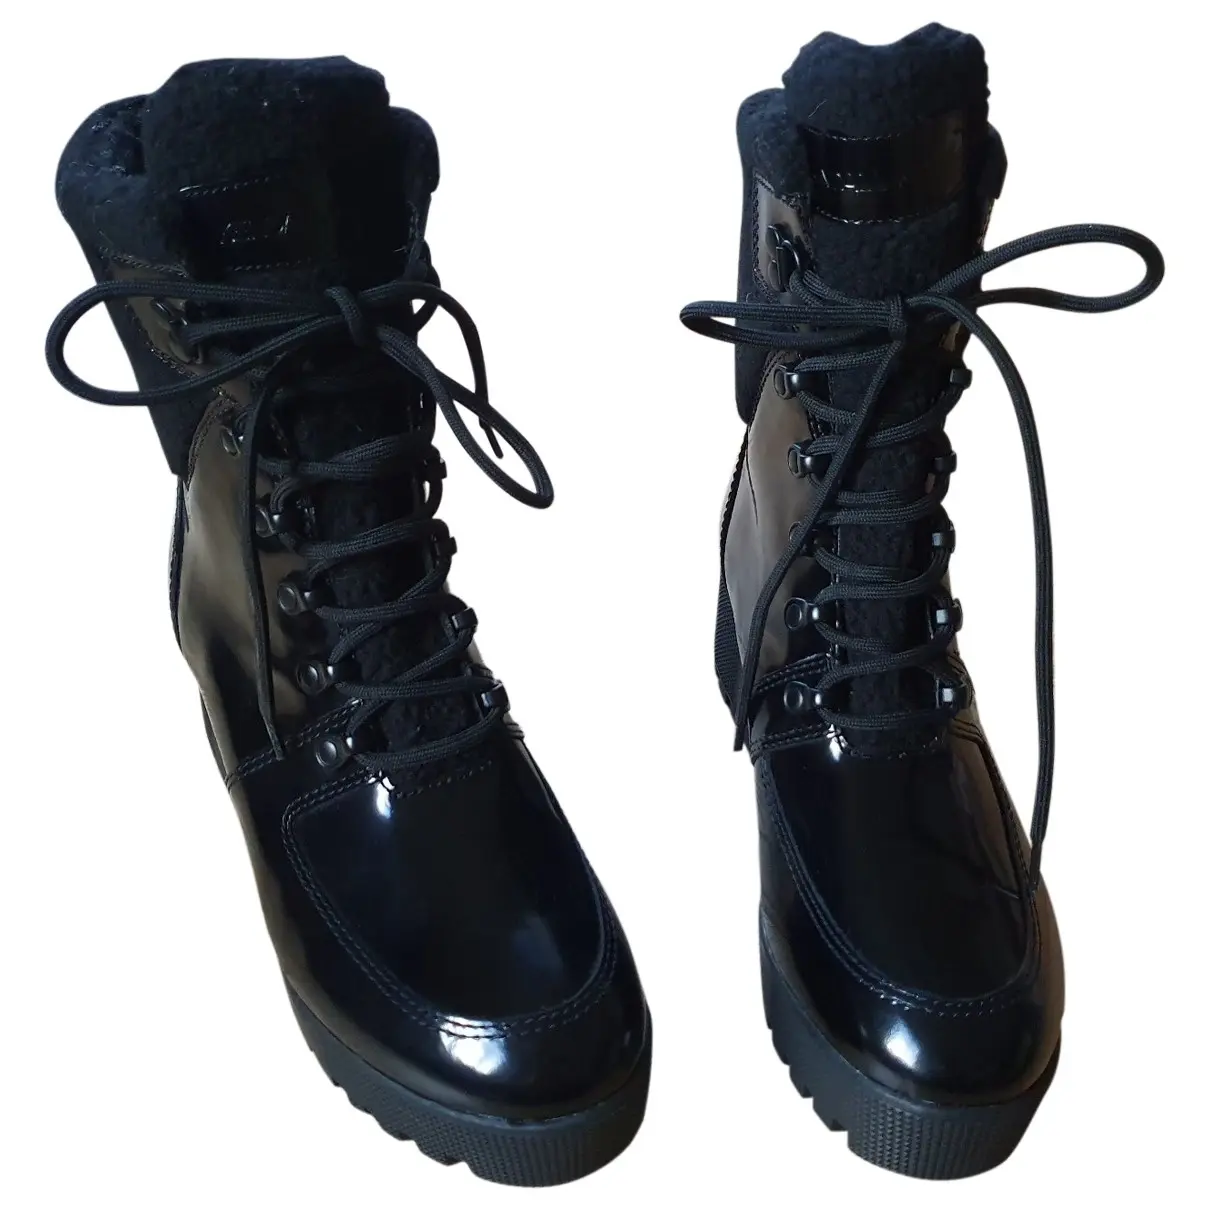 Kendall + Kylie Patent leather lace up boots for sale